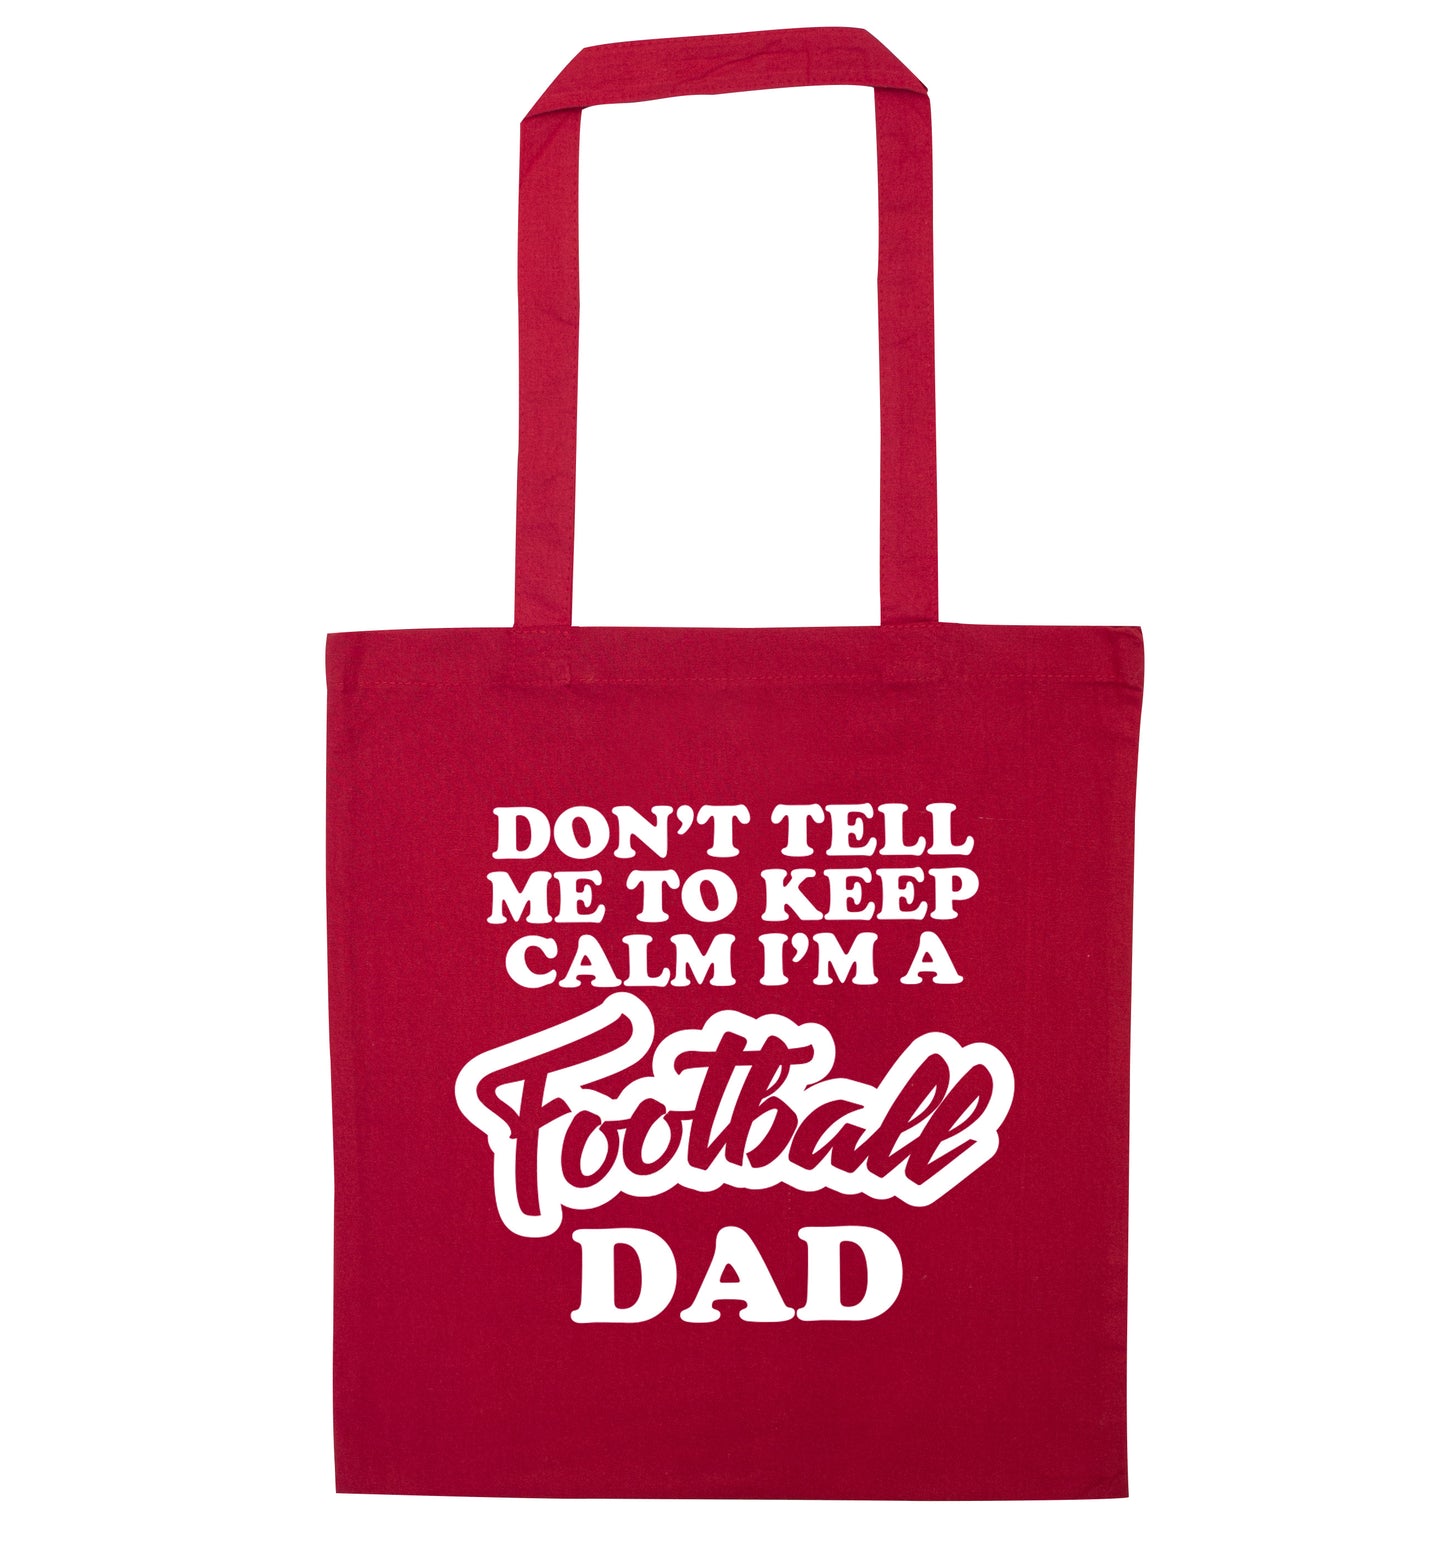 Don't tell me to keep calm I'm a football grandad red tote bag